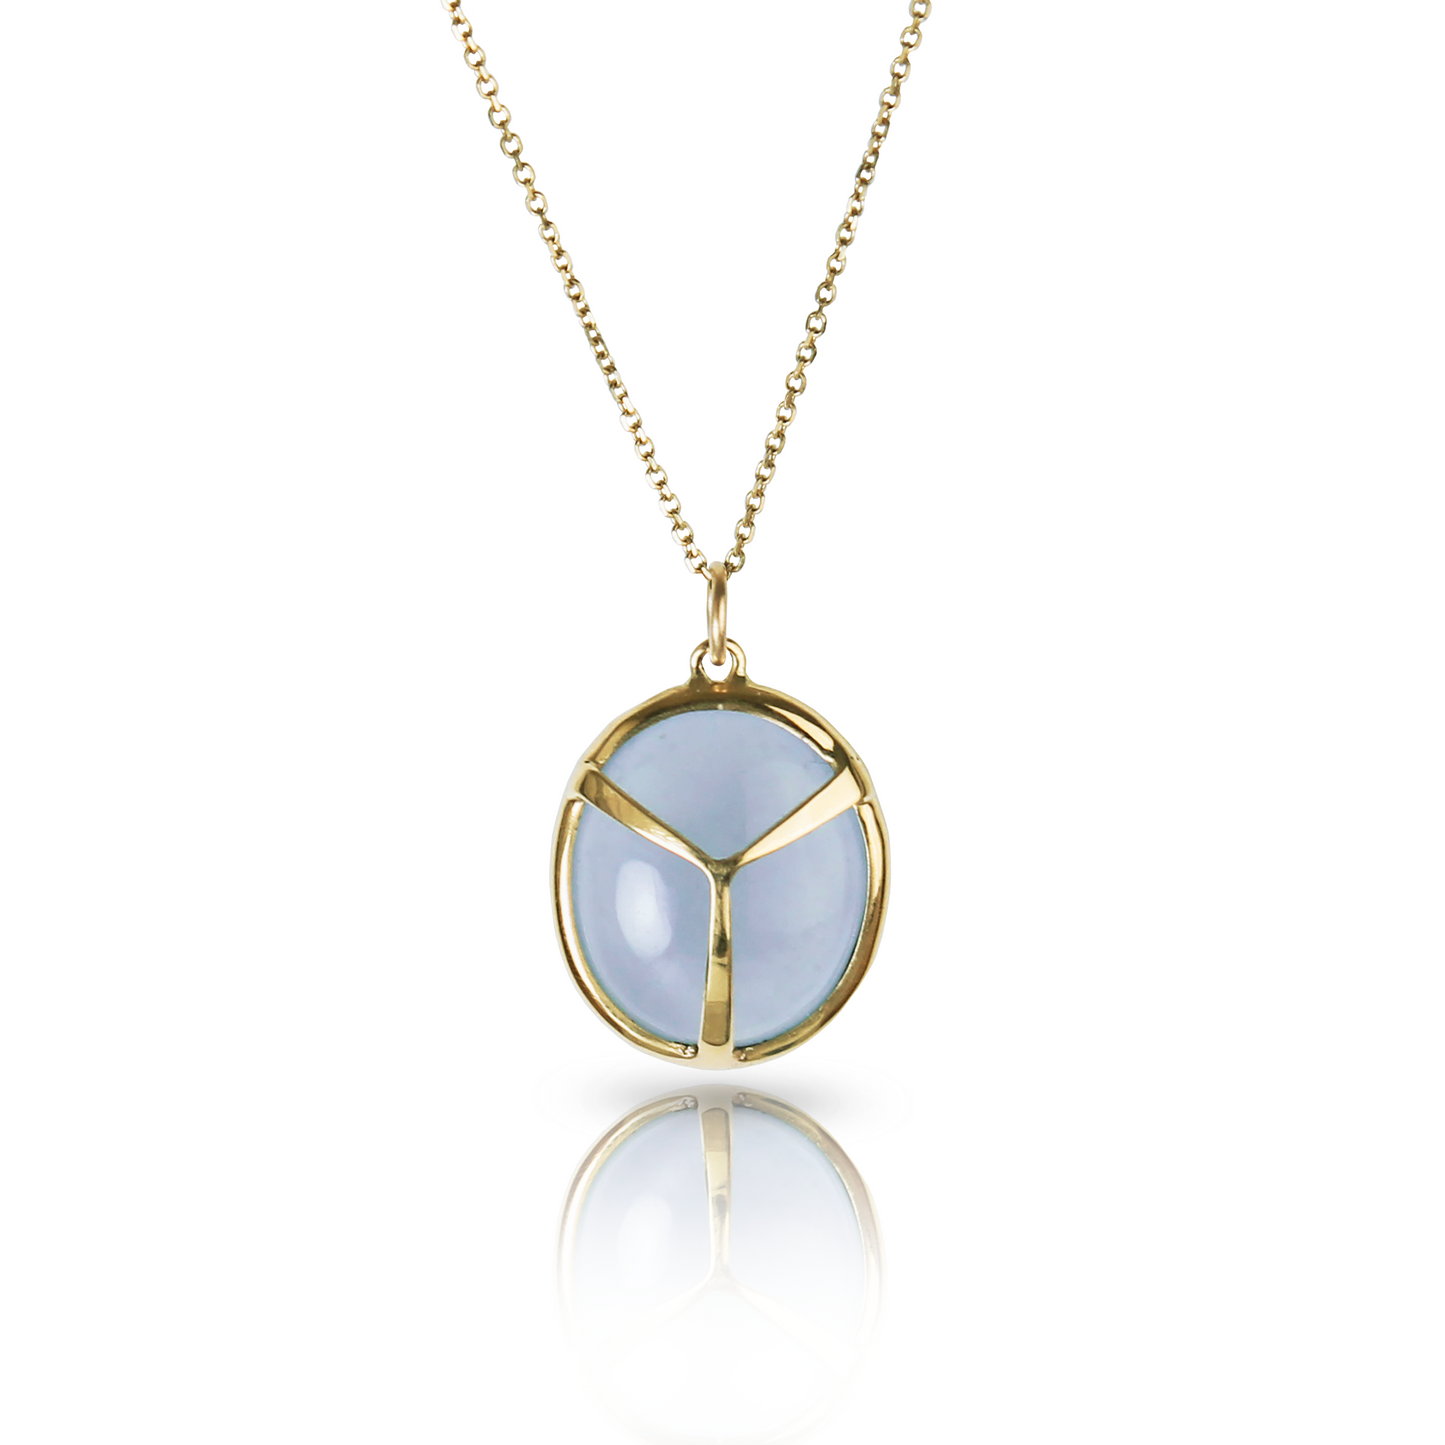 Necklace with light grey Chalcedony, oval shaped charm with beetle wing detail, bezel set, on gold chain